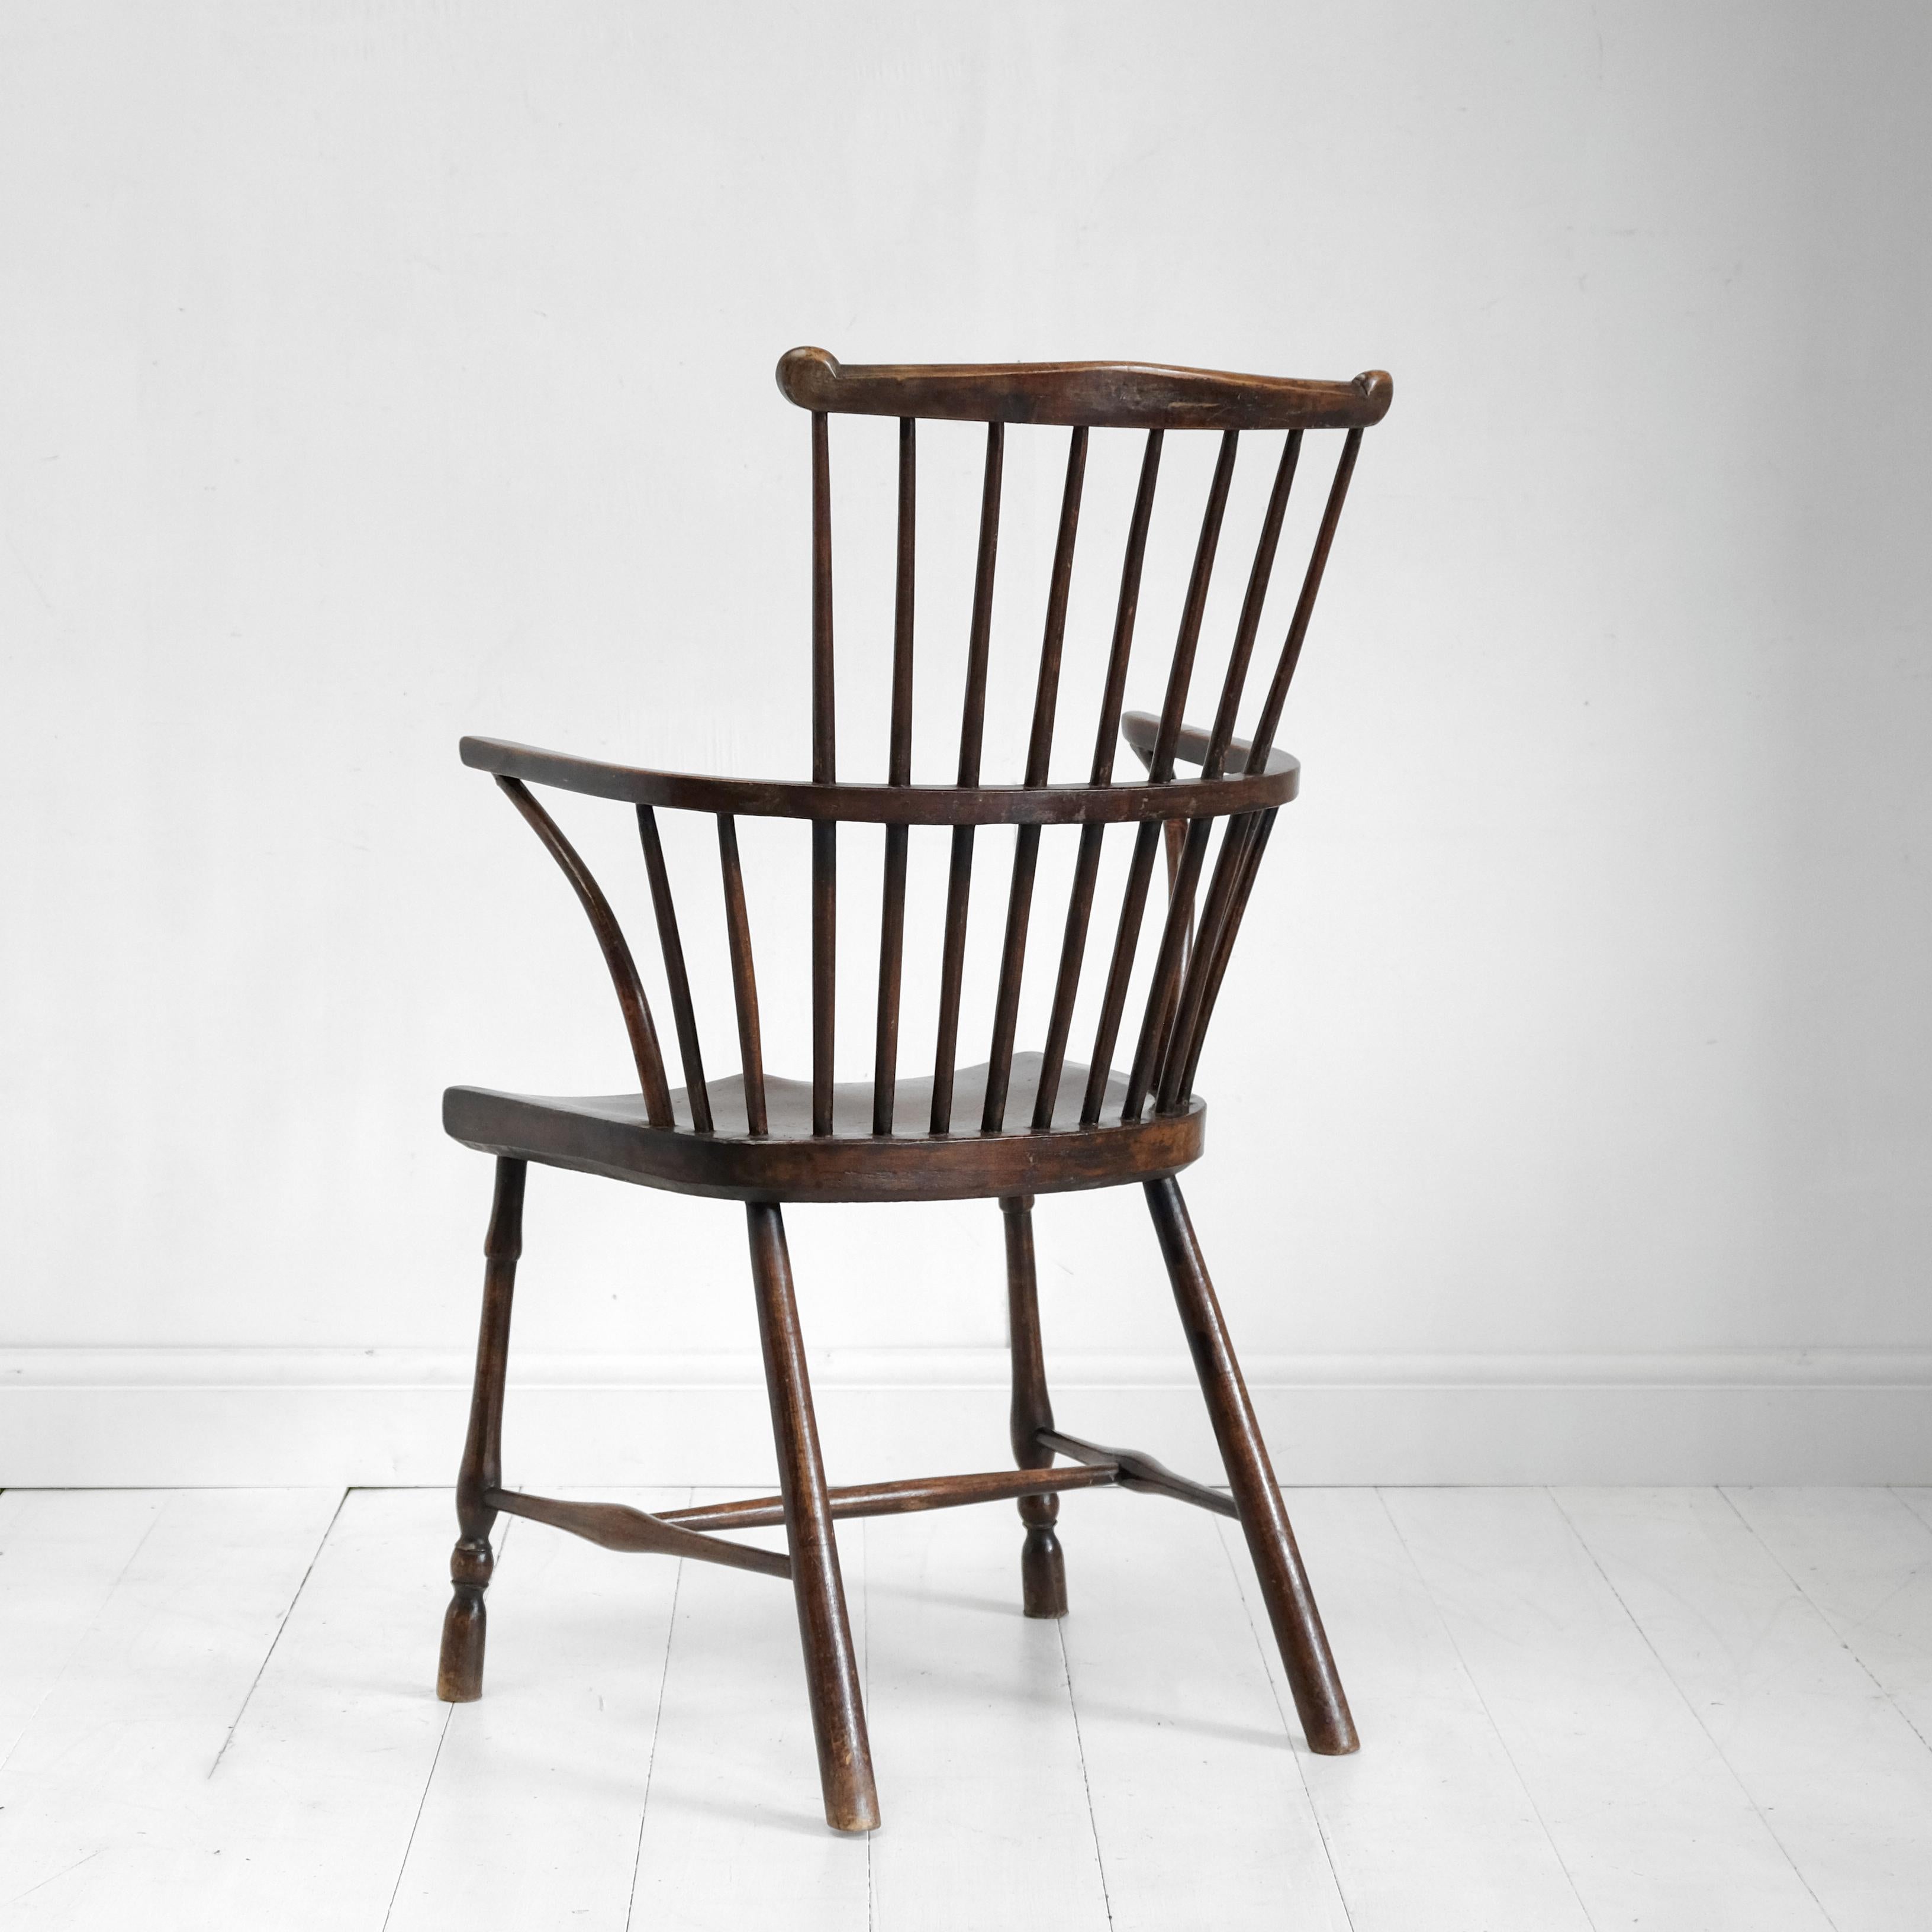 Hand-Carved English Comb Back Windsor Chair, Elm and Beech, 1800, West Country, Vernacular